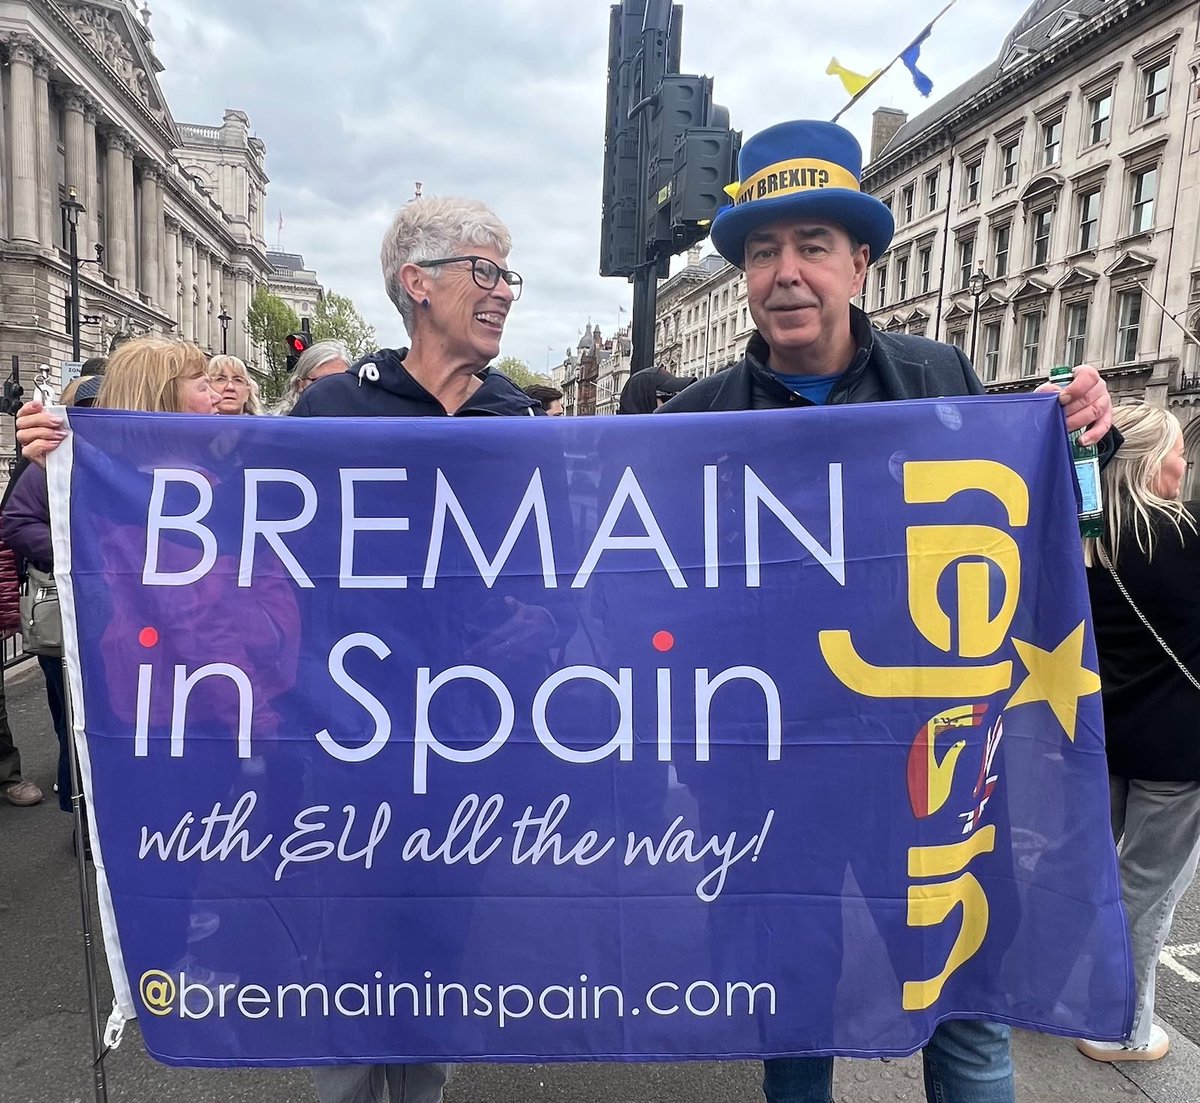 Great to see Sue @Suewilson91 from @BremainInSpain with @snb19692 @SODEMAction today! Pic by @wingletlove